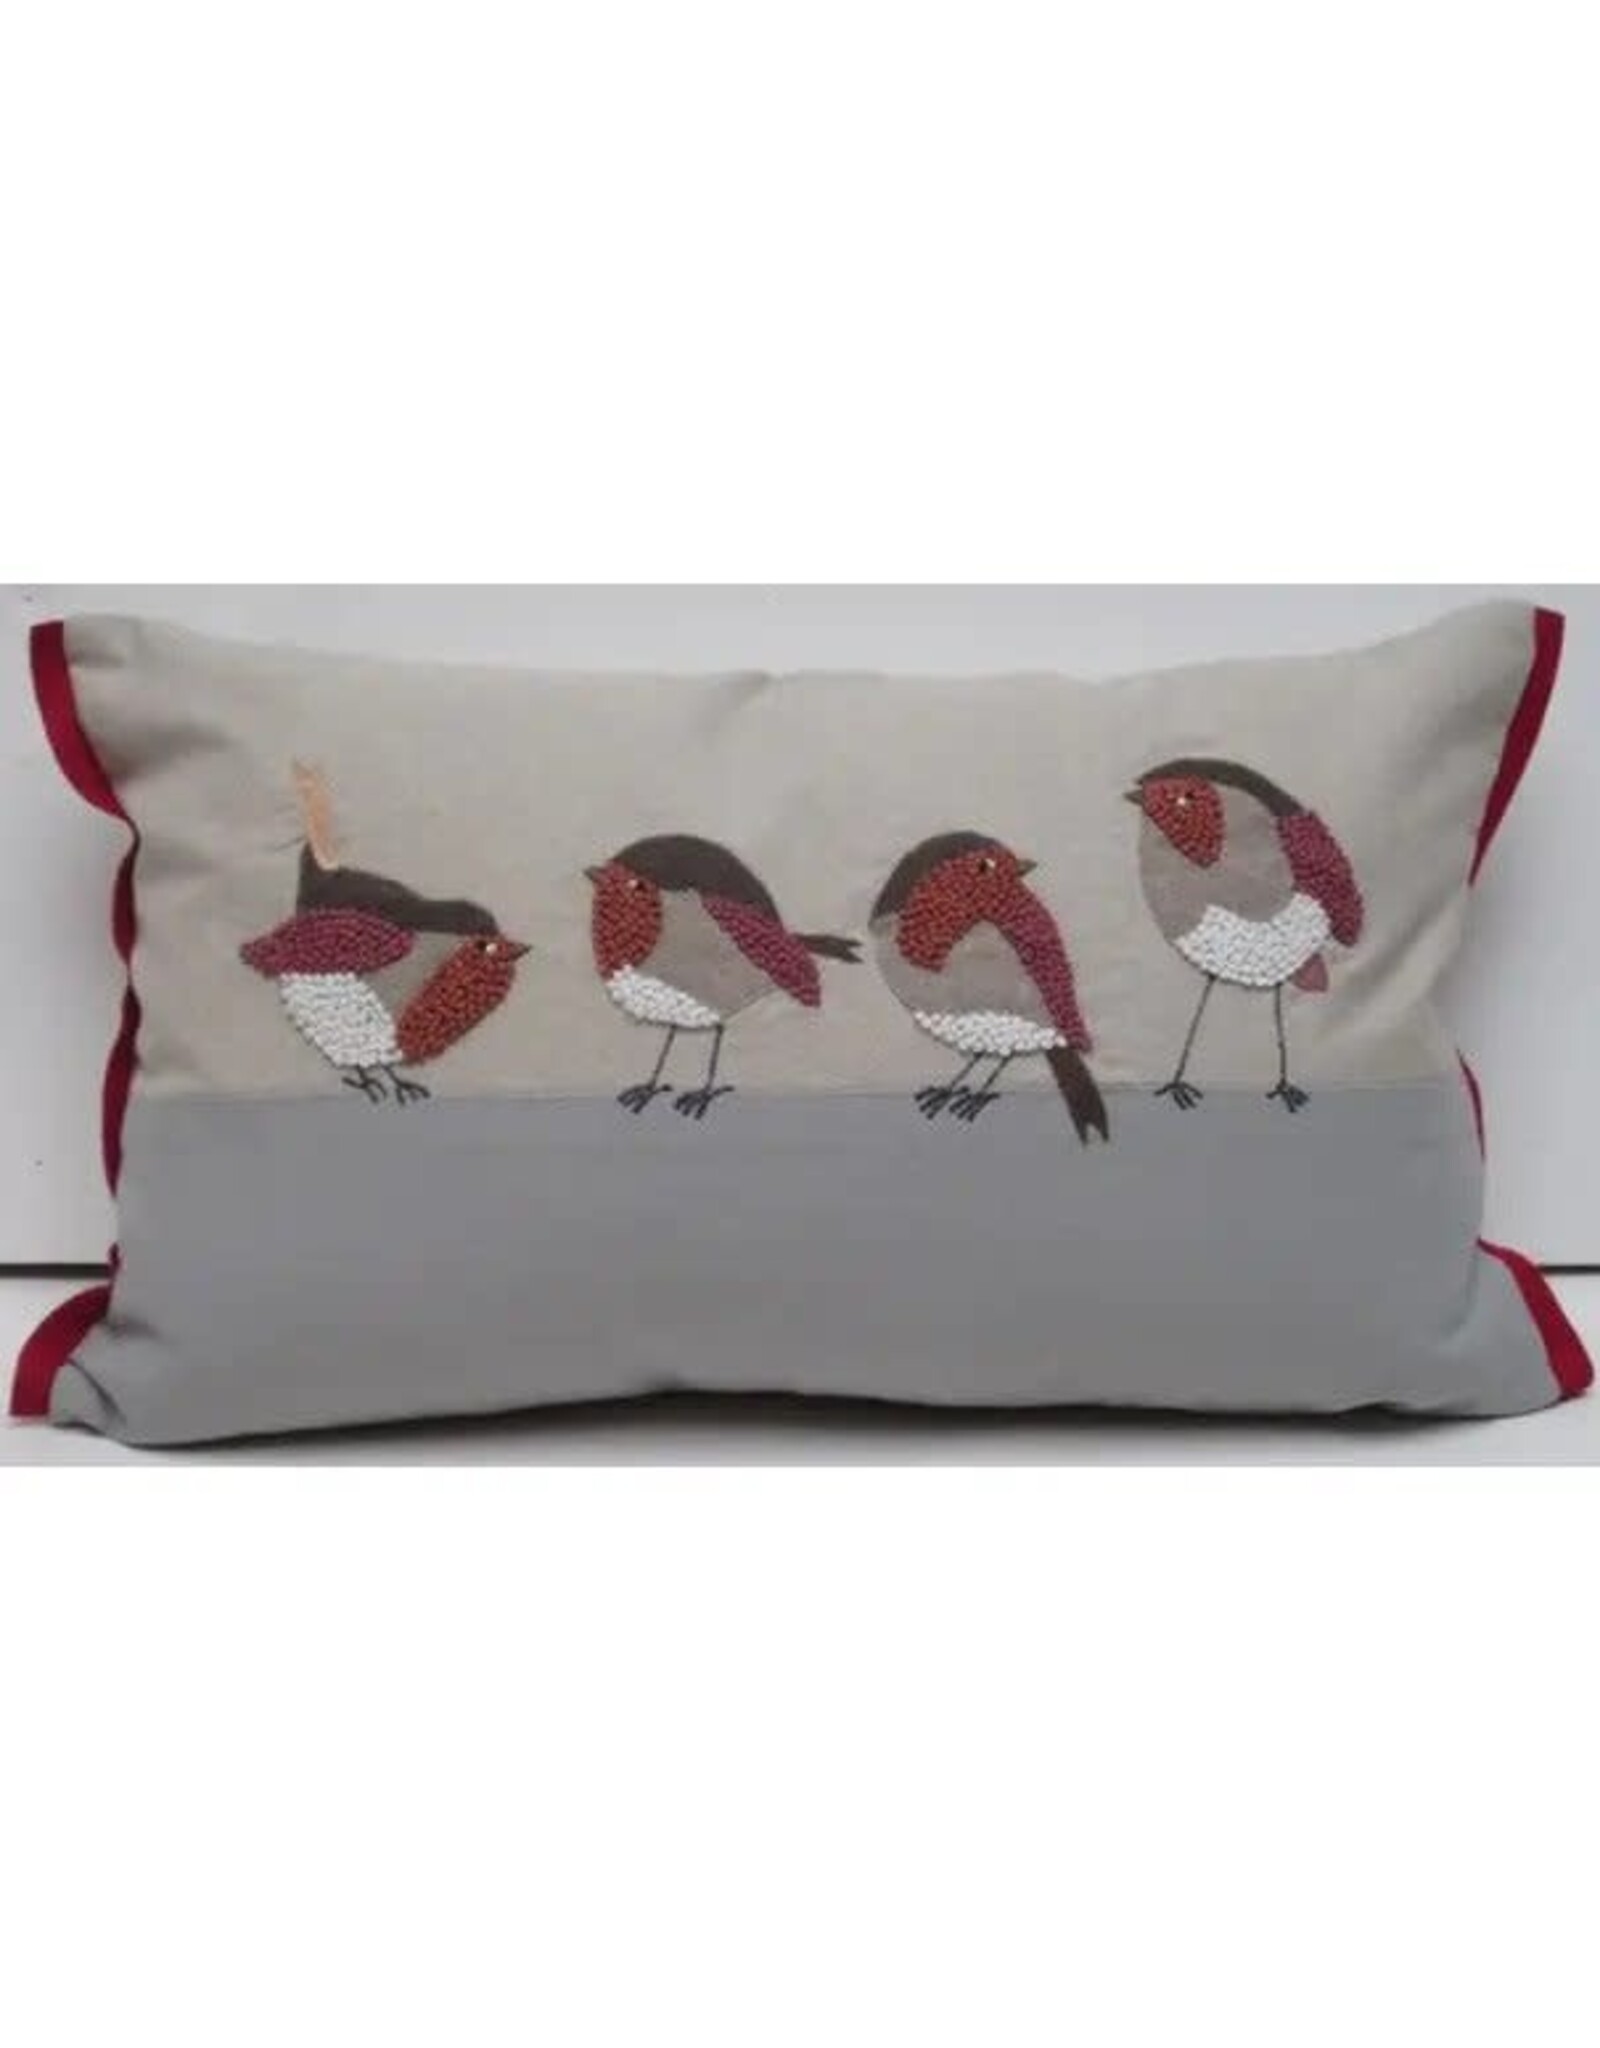 Trade roots Knotty Robbins Pillow, Applique, 12x20", India